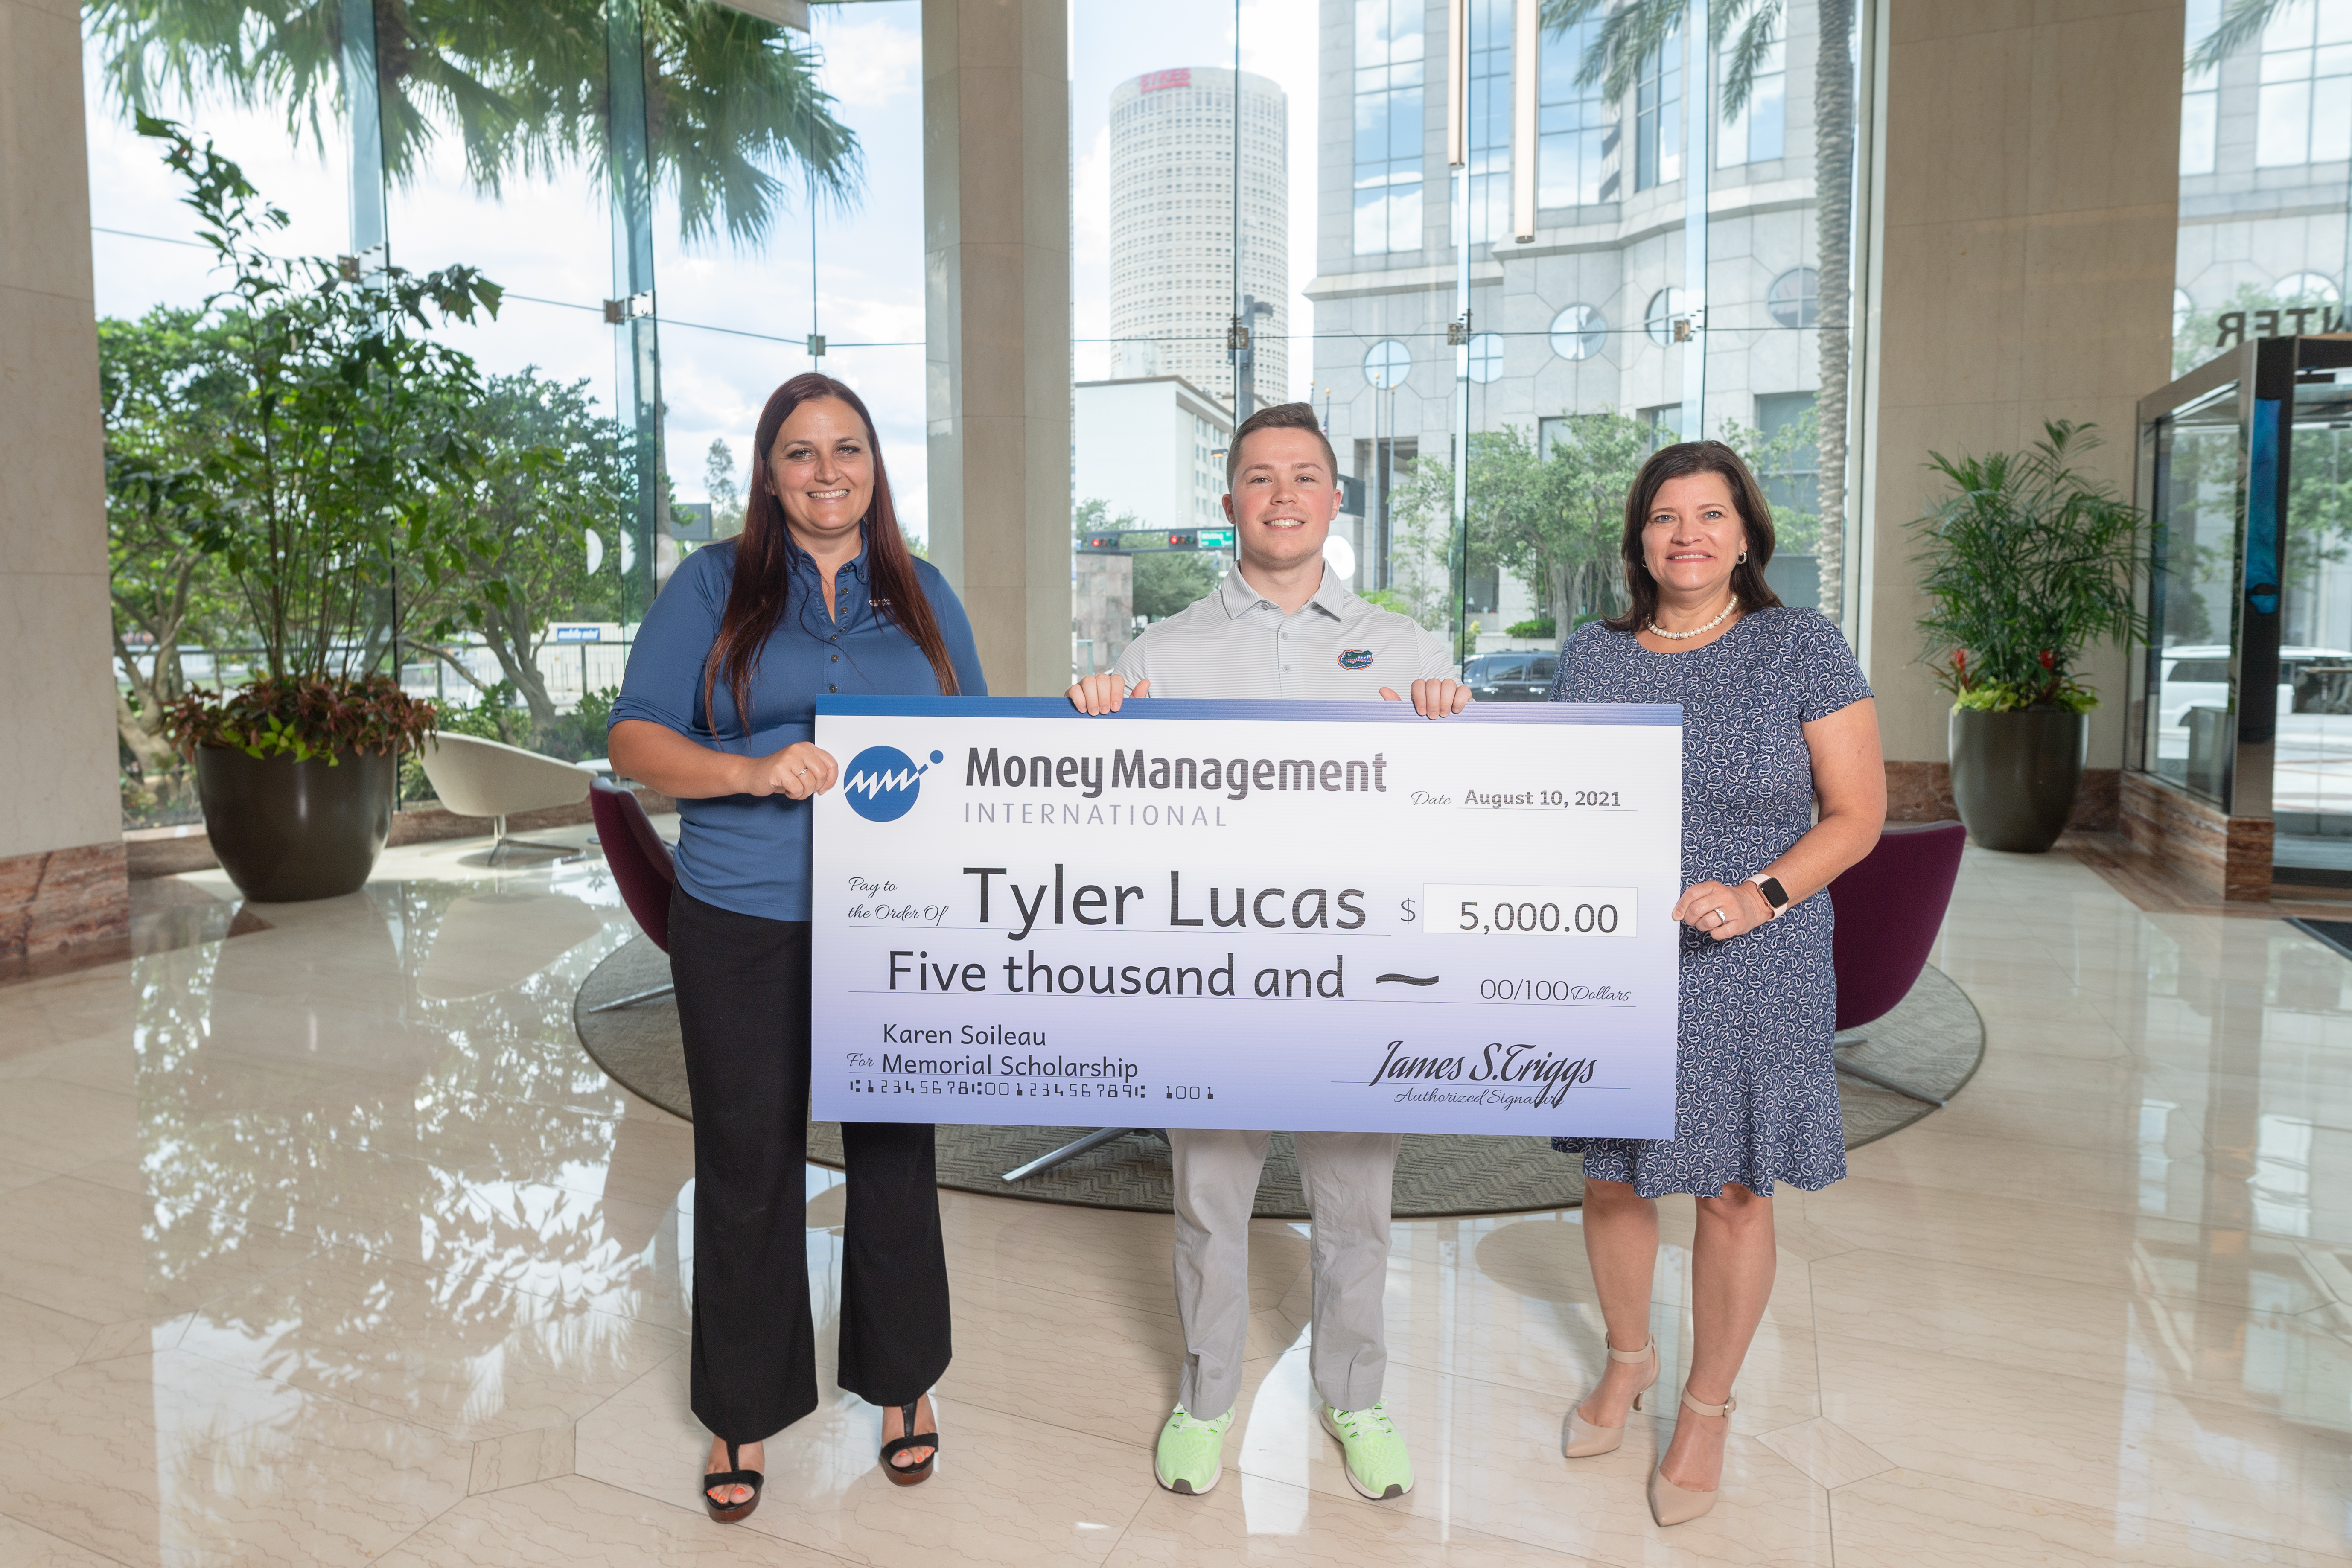 From left to right: MMI Vice President of Counseling and Support Jamie Payne, Karen Soileau Memorial Scholarship recipient Tyler Lucas, MMI Senior Director of Support Services Michelle Chacon